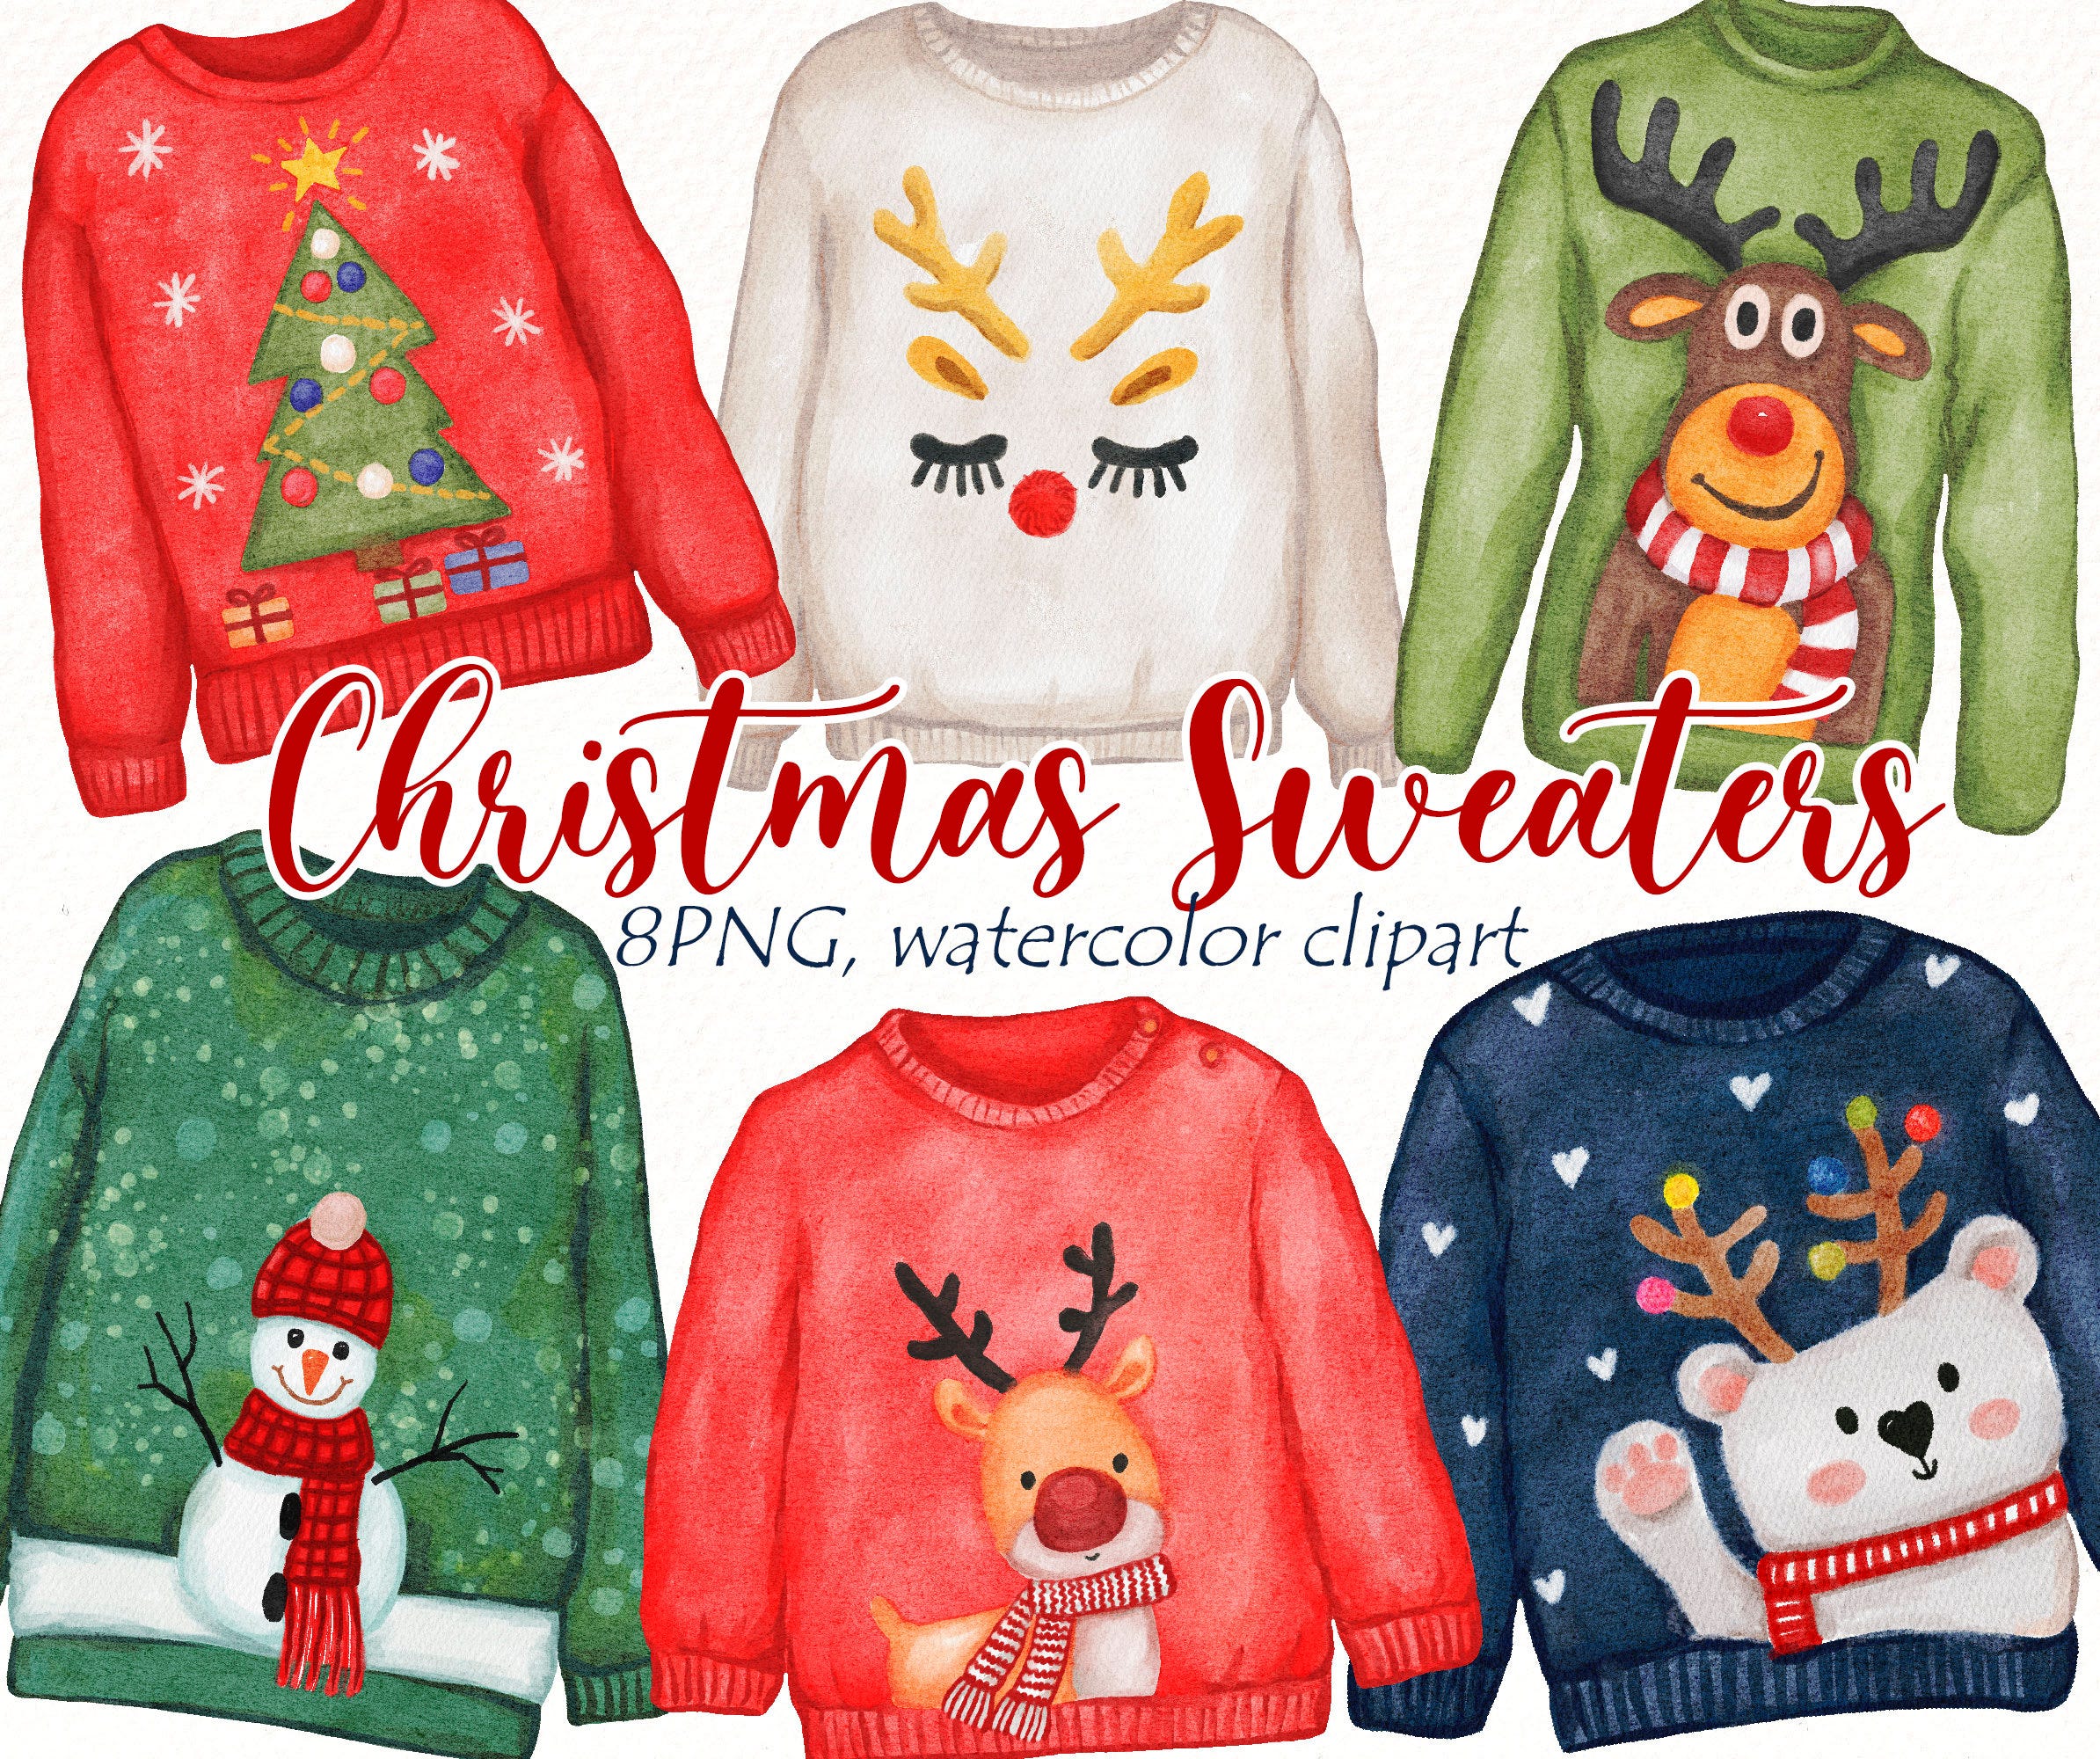 Ugly Christmas Sweater watercolor clipart, Winter clothes clip art, Xmas Noel Party, Season greetings card, planner, digital download.